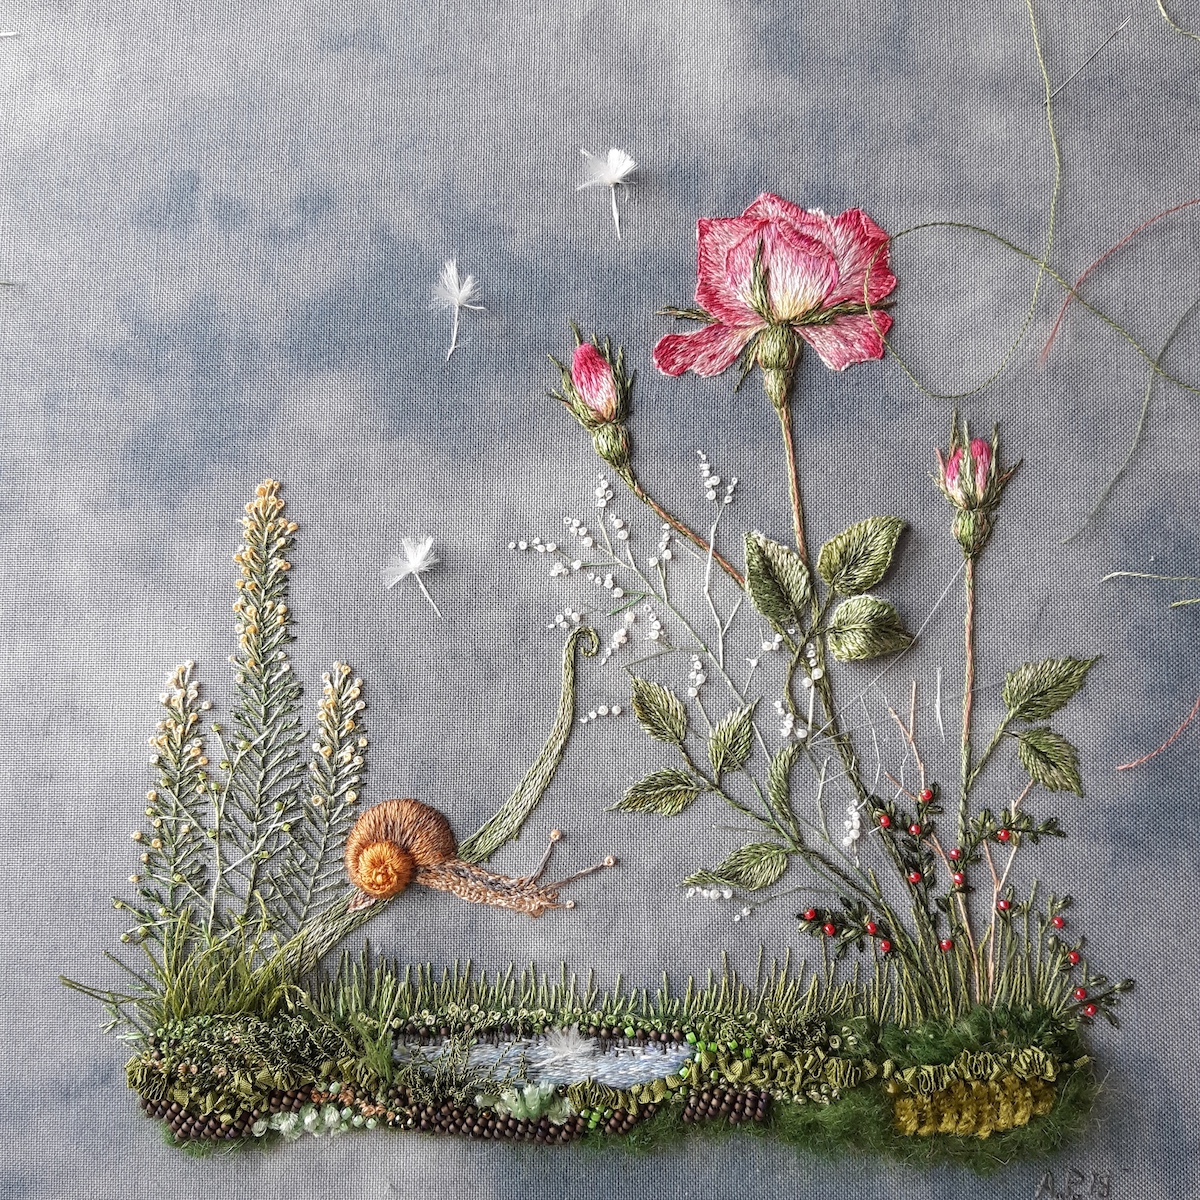 Rosa Andreeva Embroidered Garden With Snail